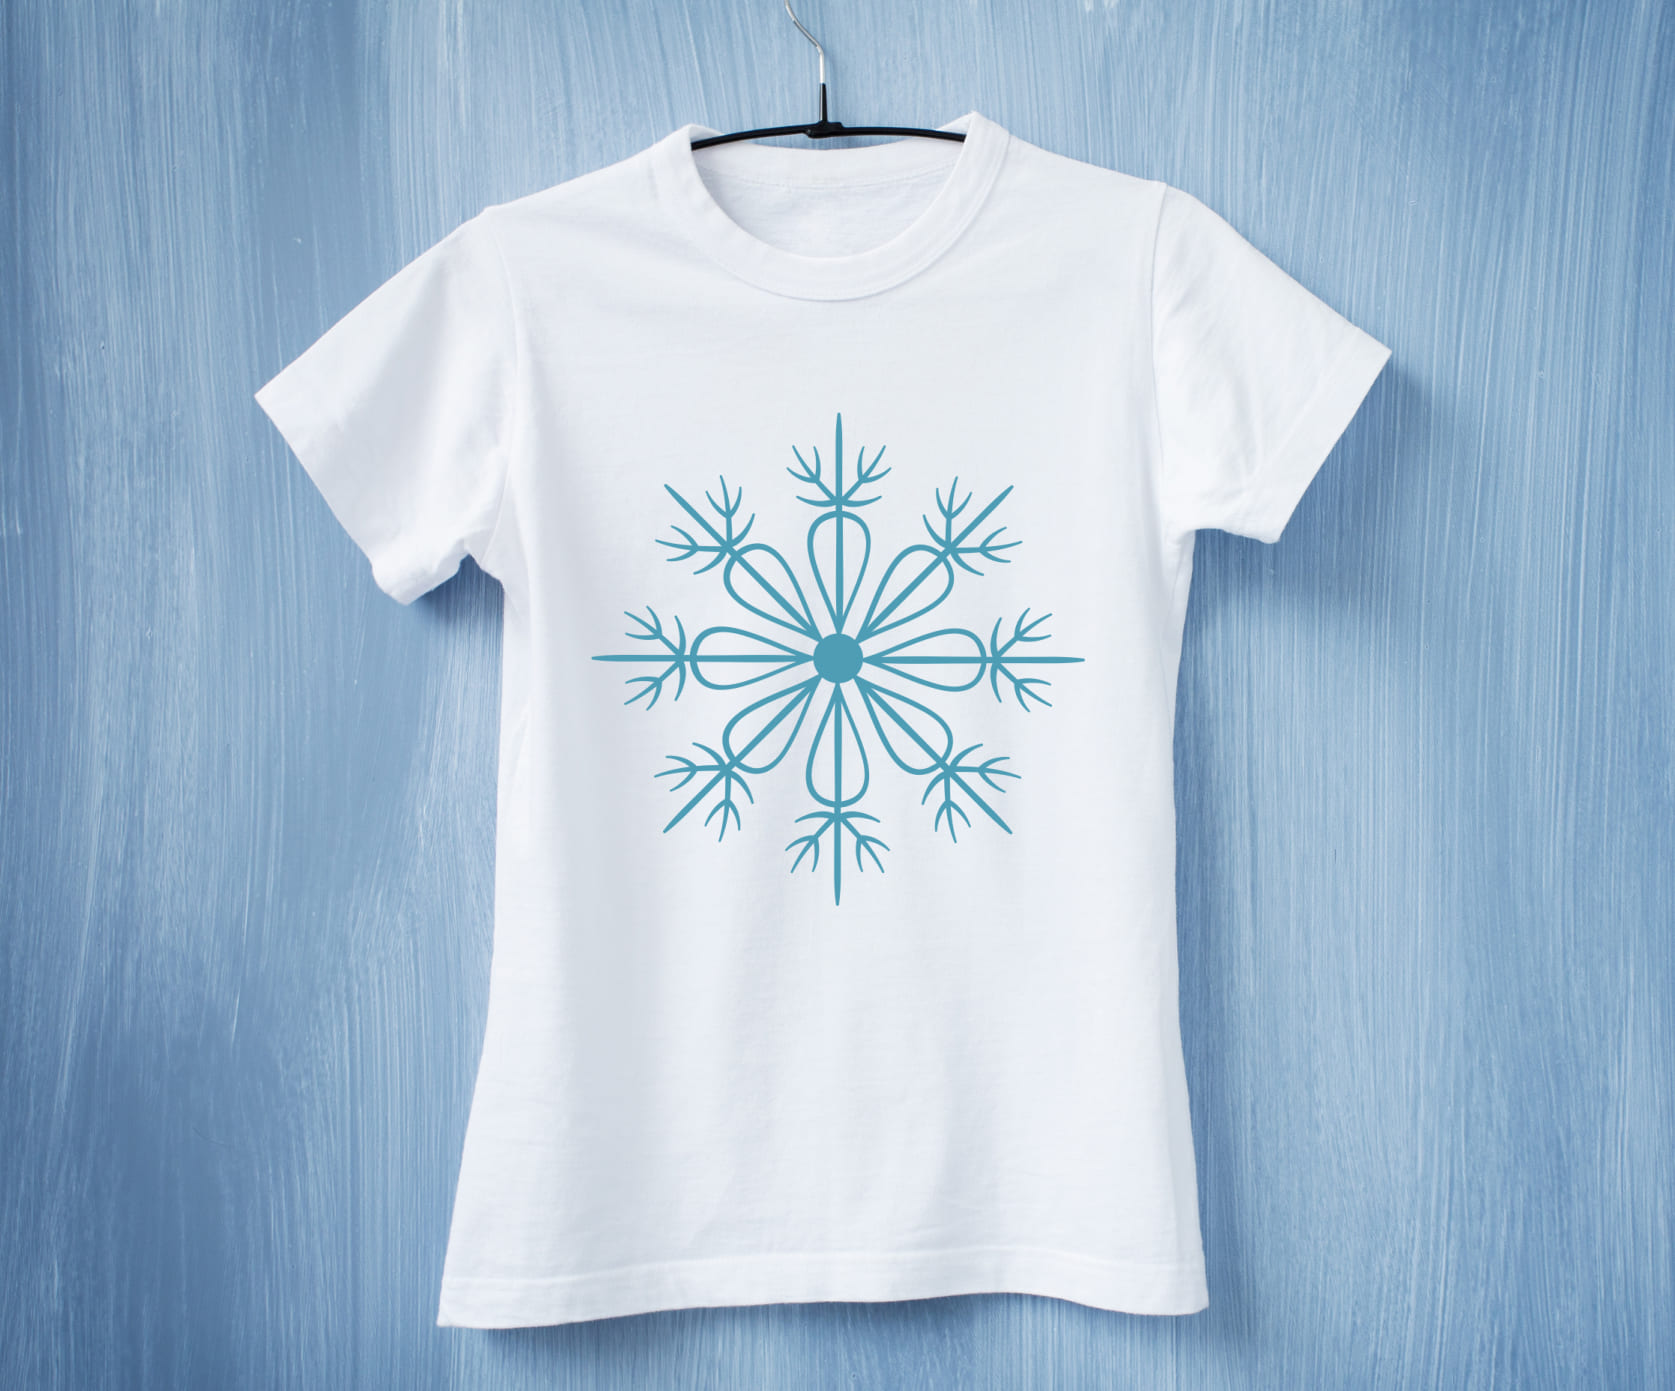 Laconic flower snowflake for your t-shirt.